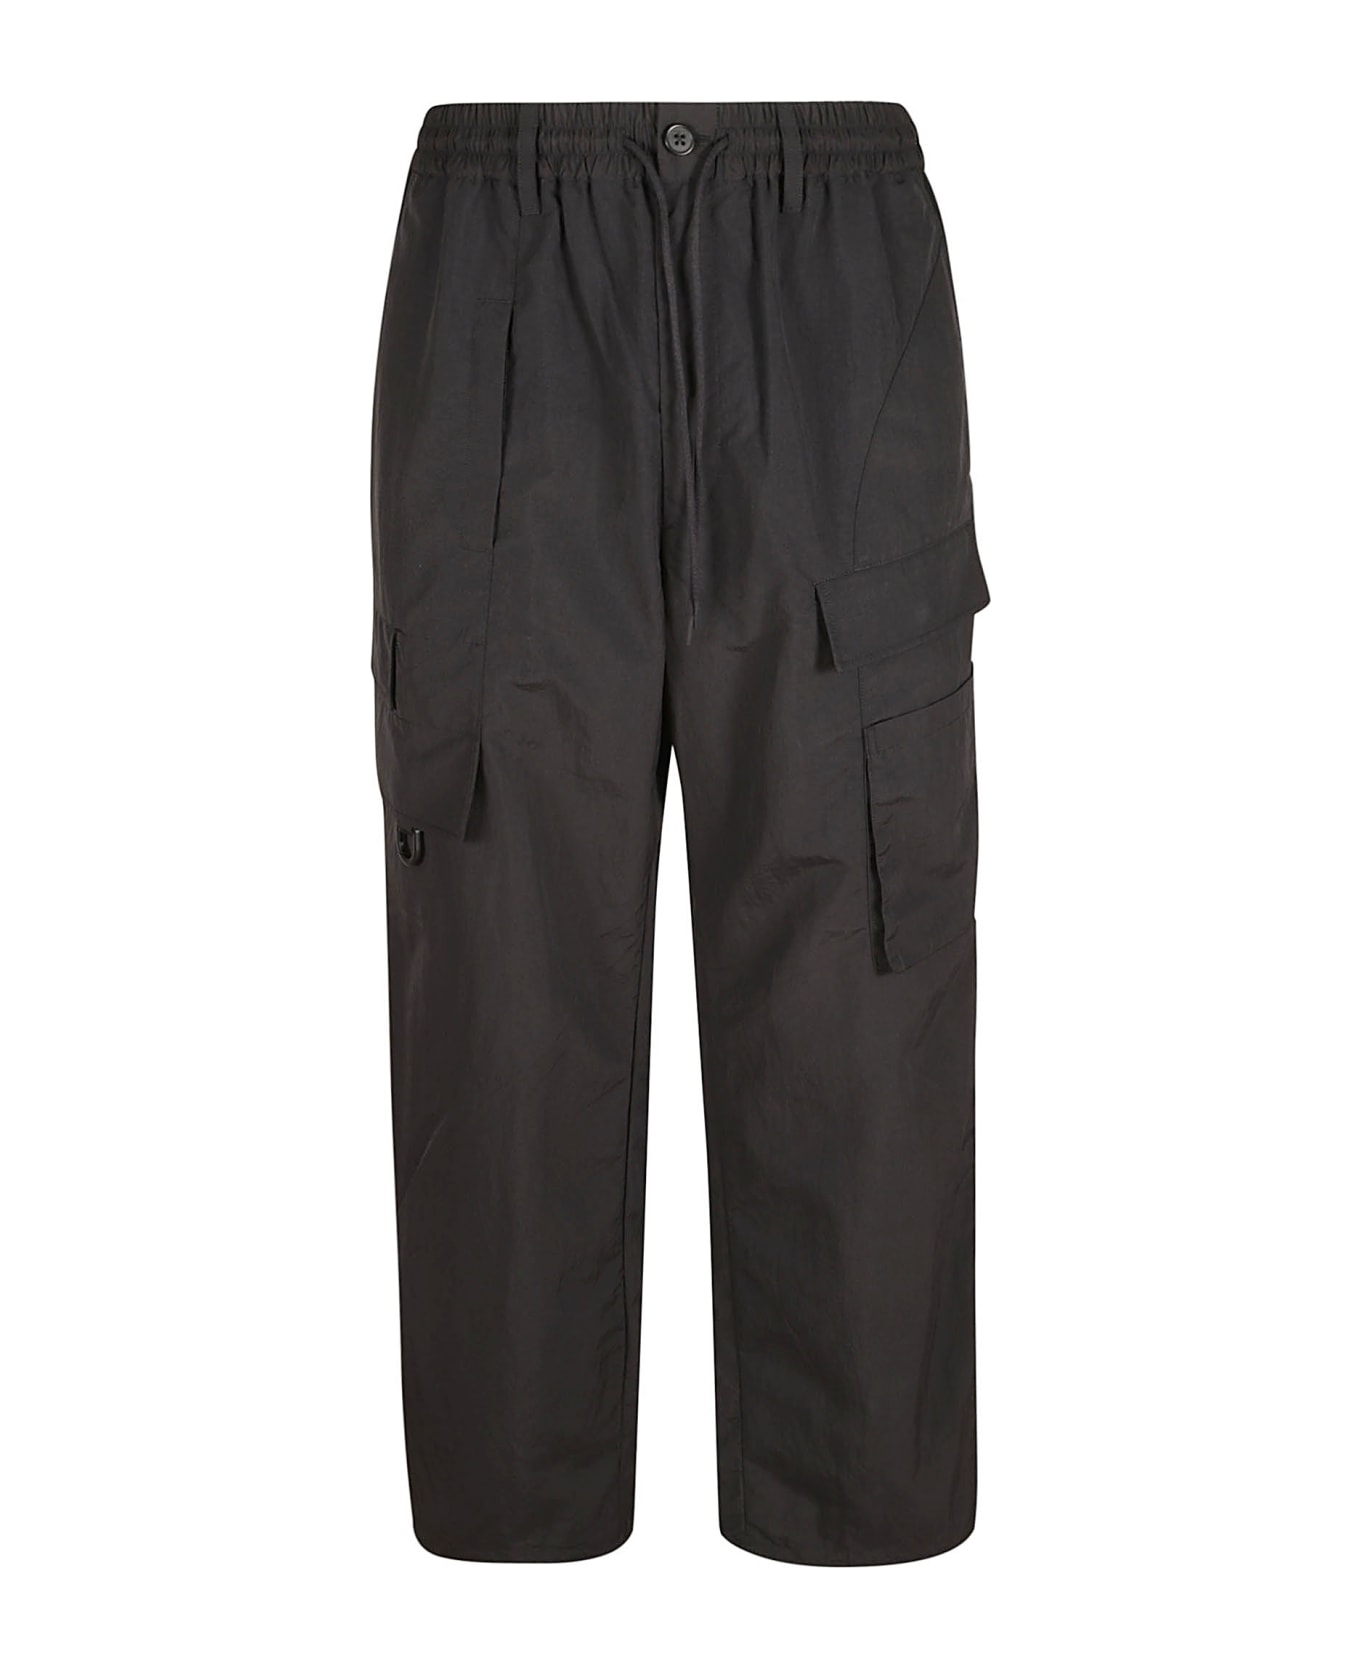 Y-3 Buttoned Cargo Trousers - Black